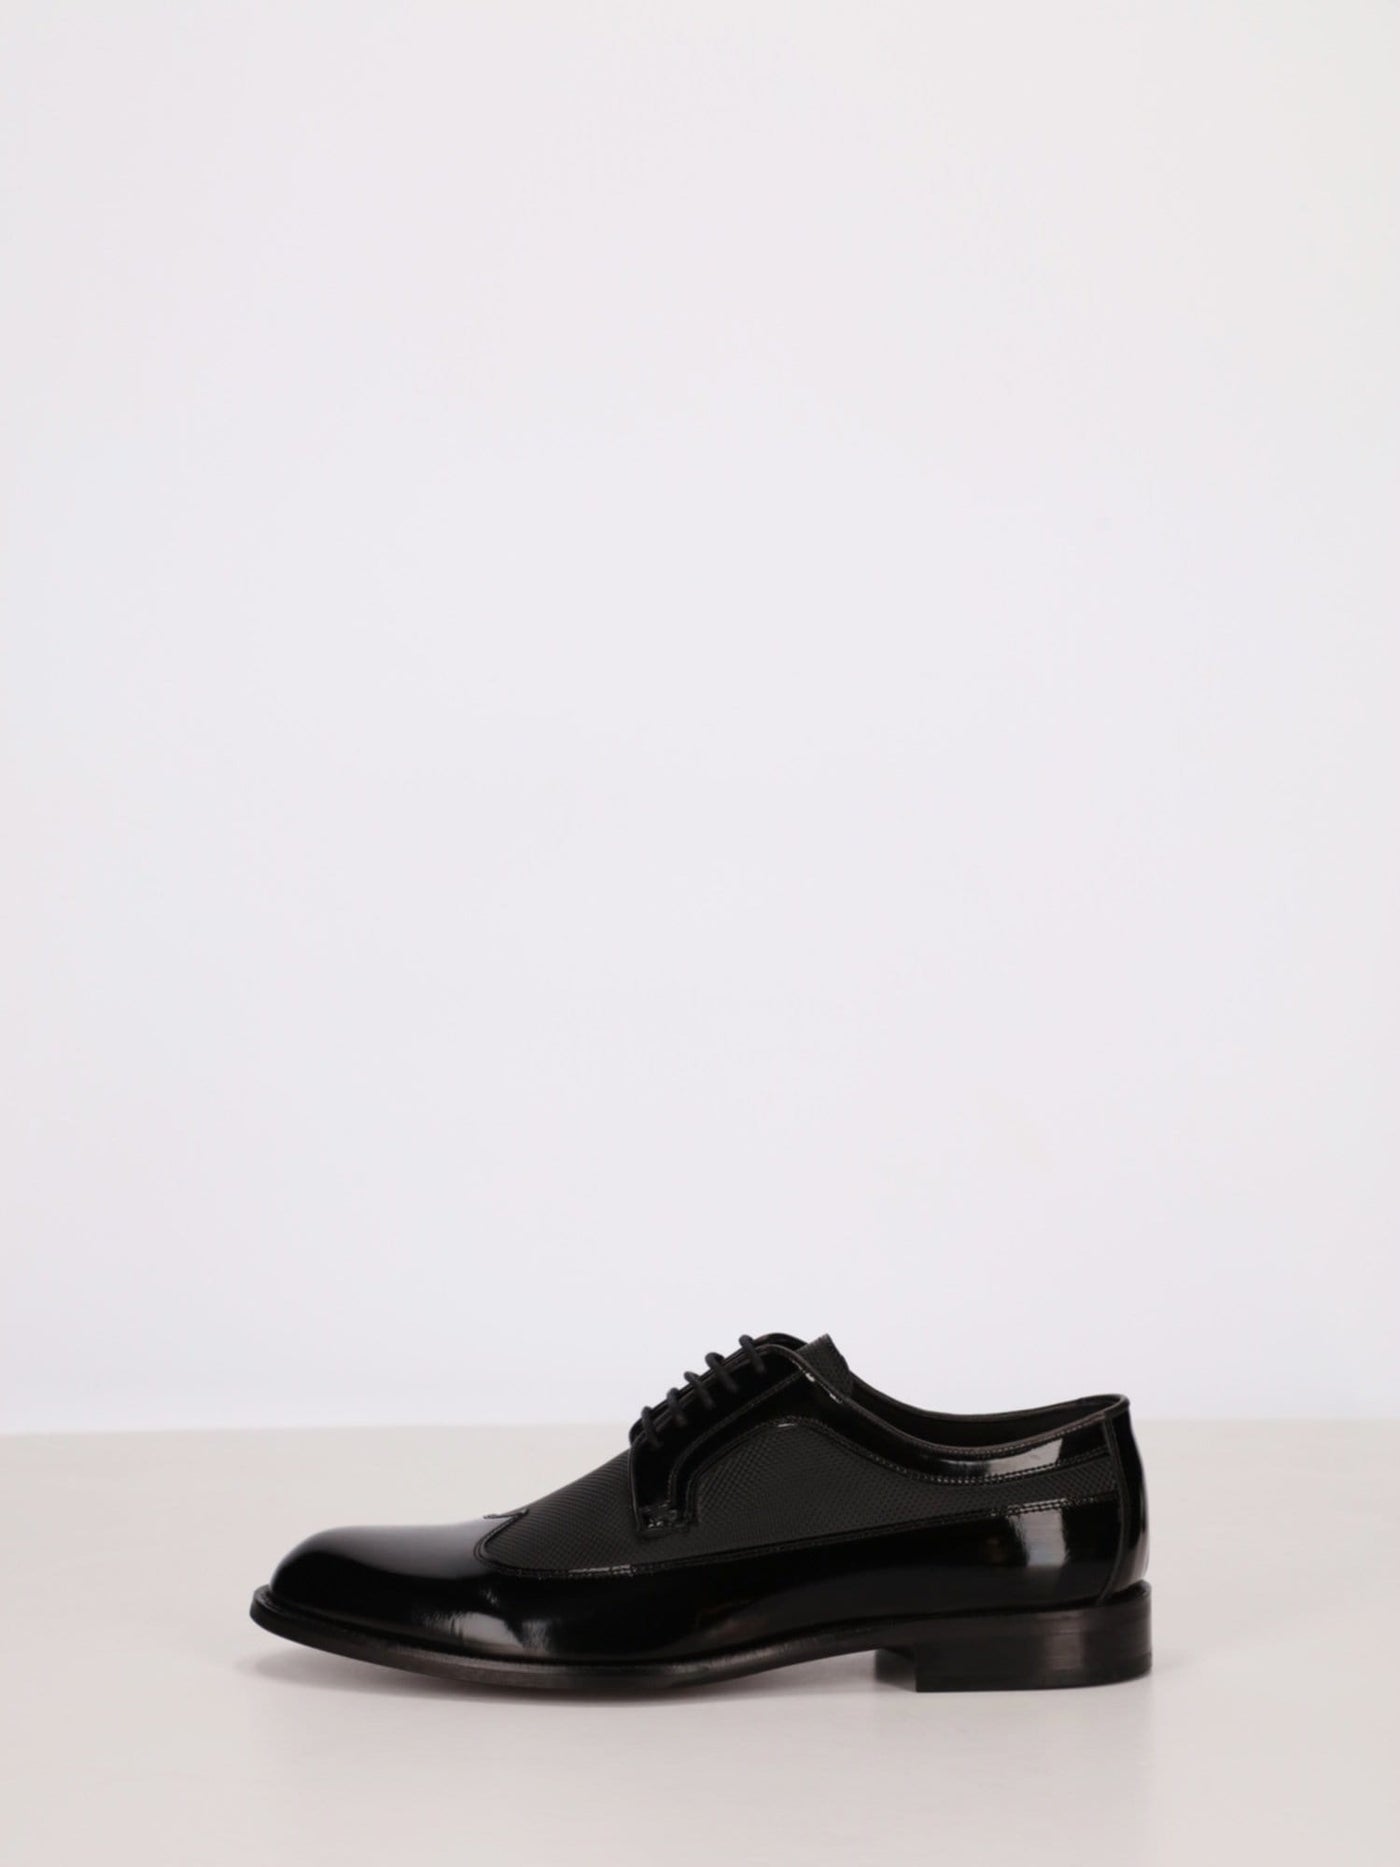 Daniel Hechter Shoes Brogue Oxford Balmoral Lace-Up Shoes